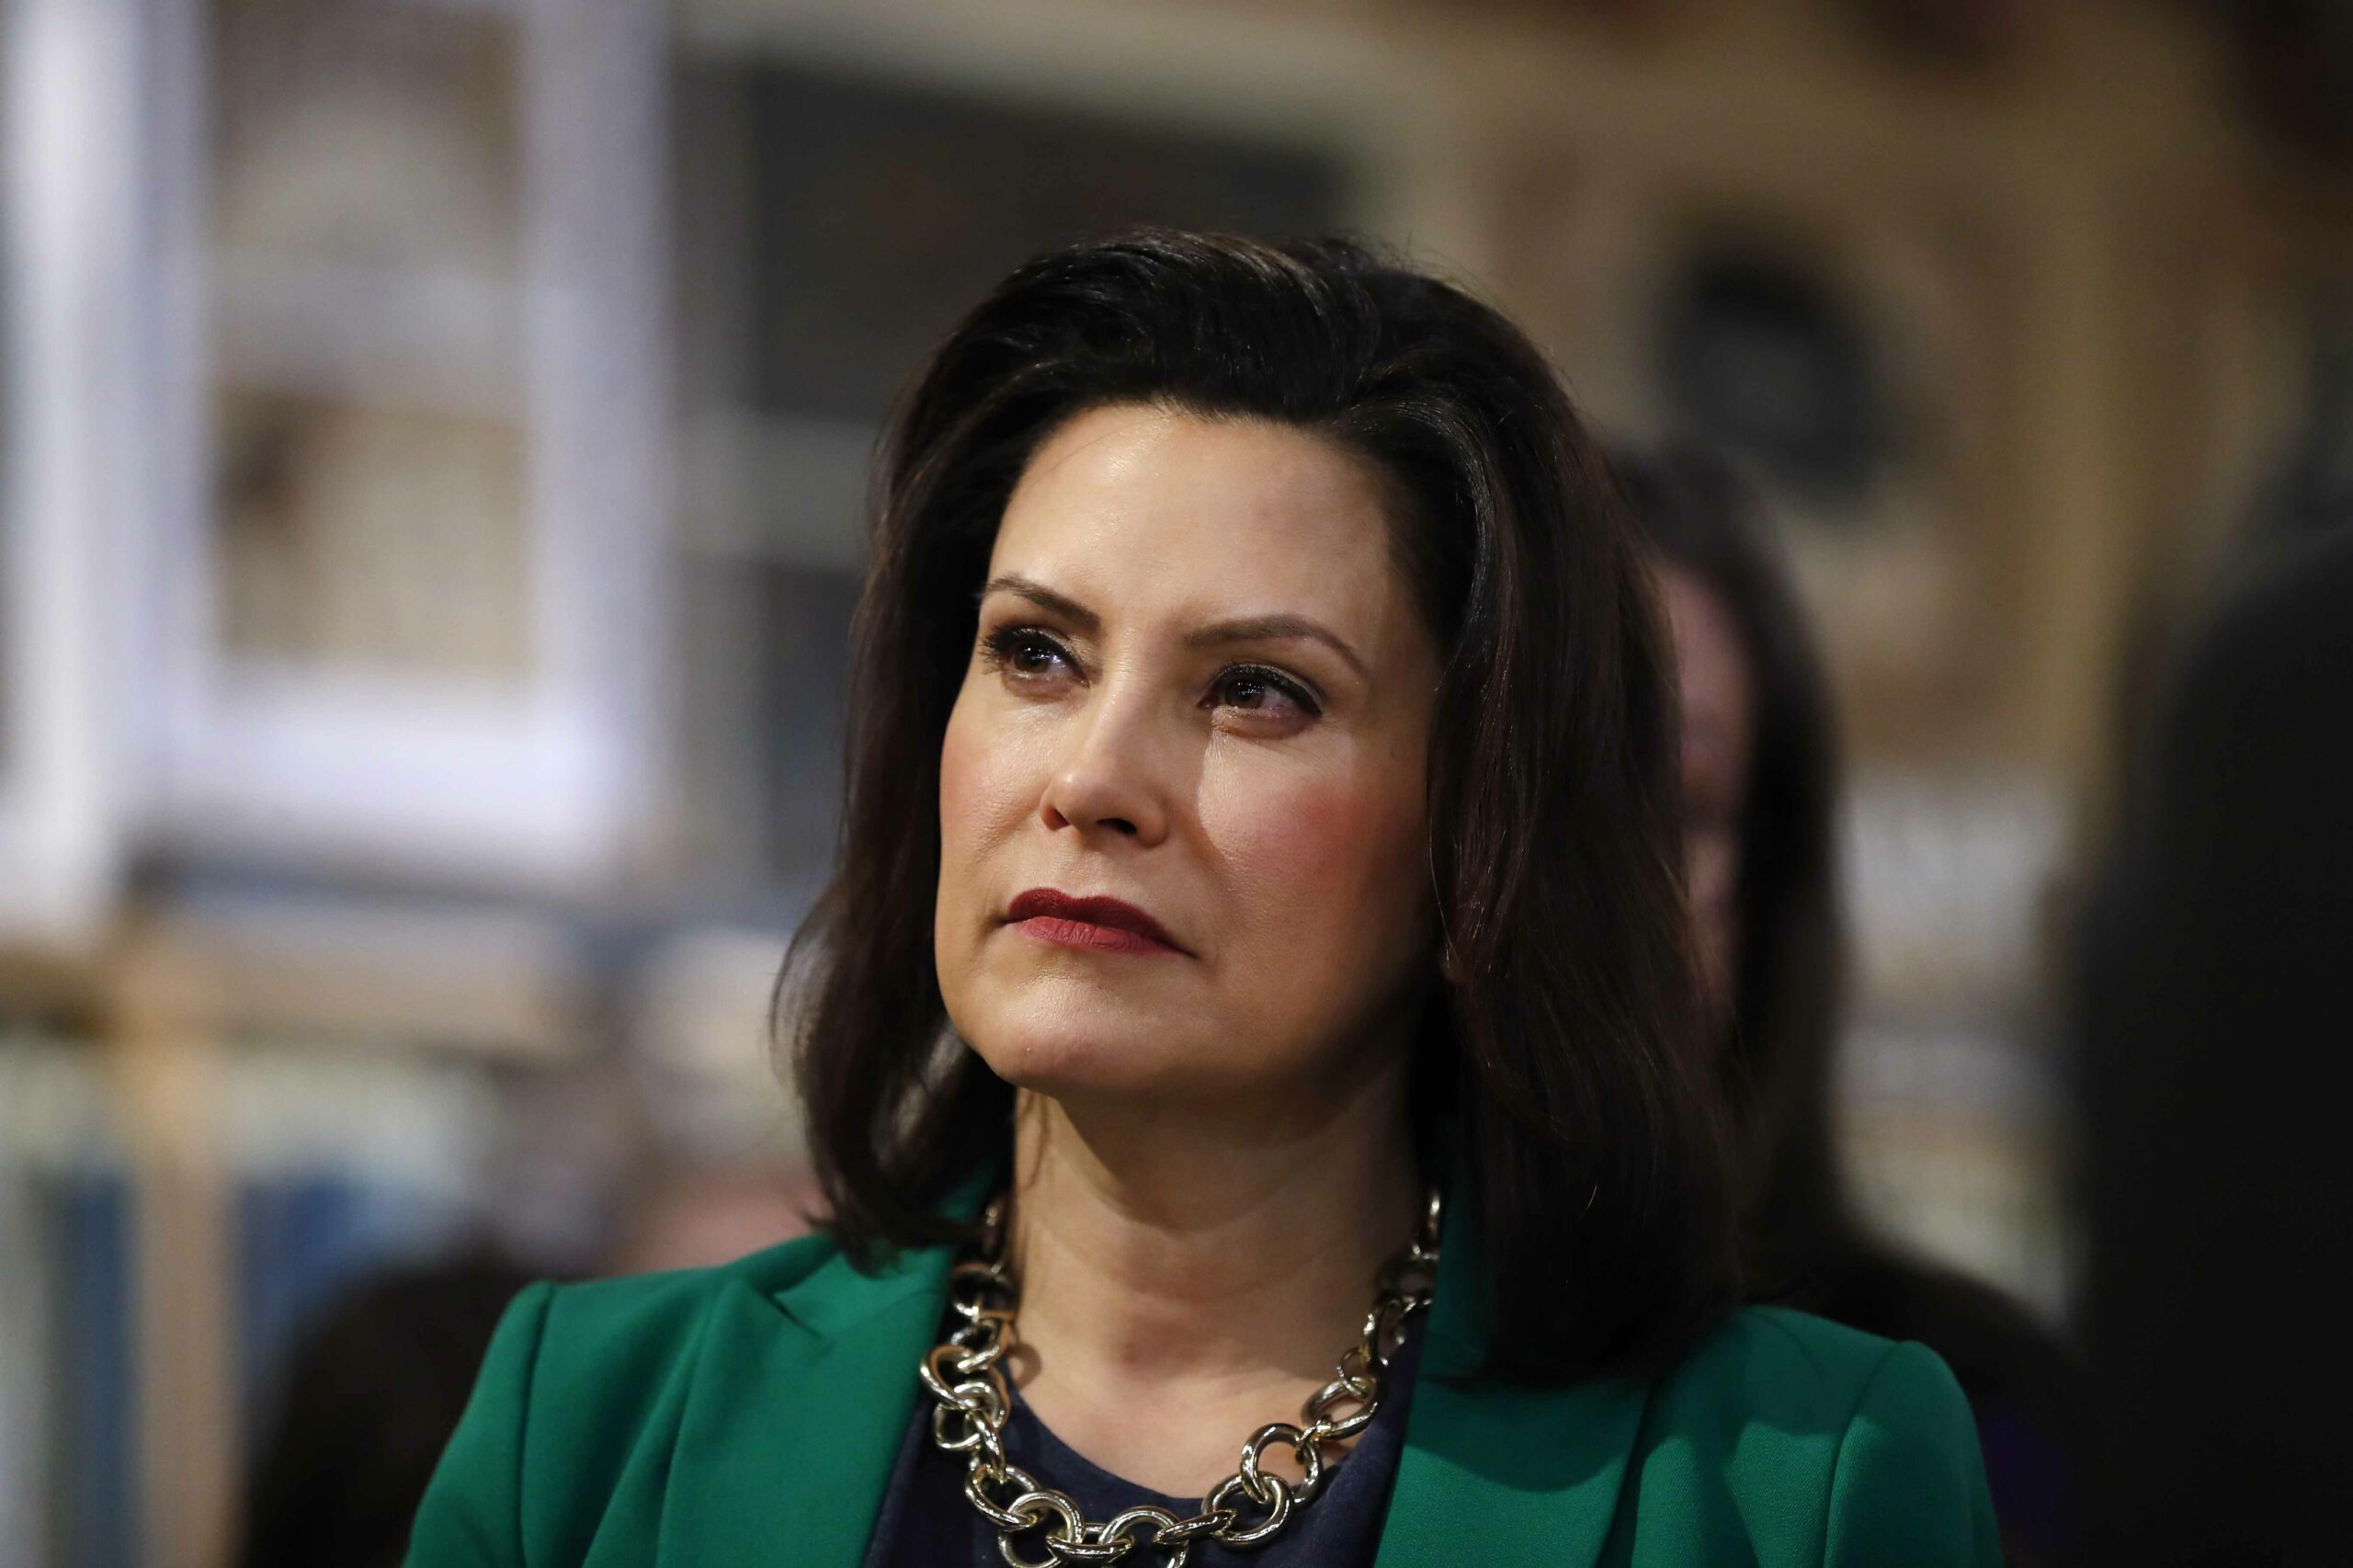 The Canadian energy company in the way of Whitmer’s campaign